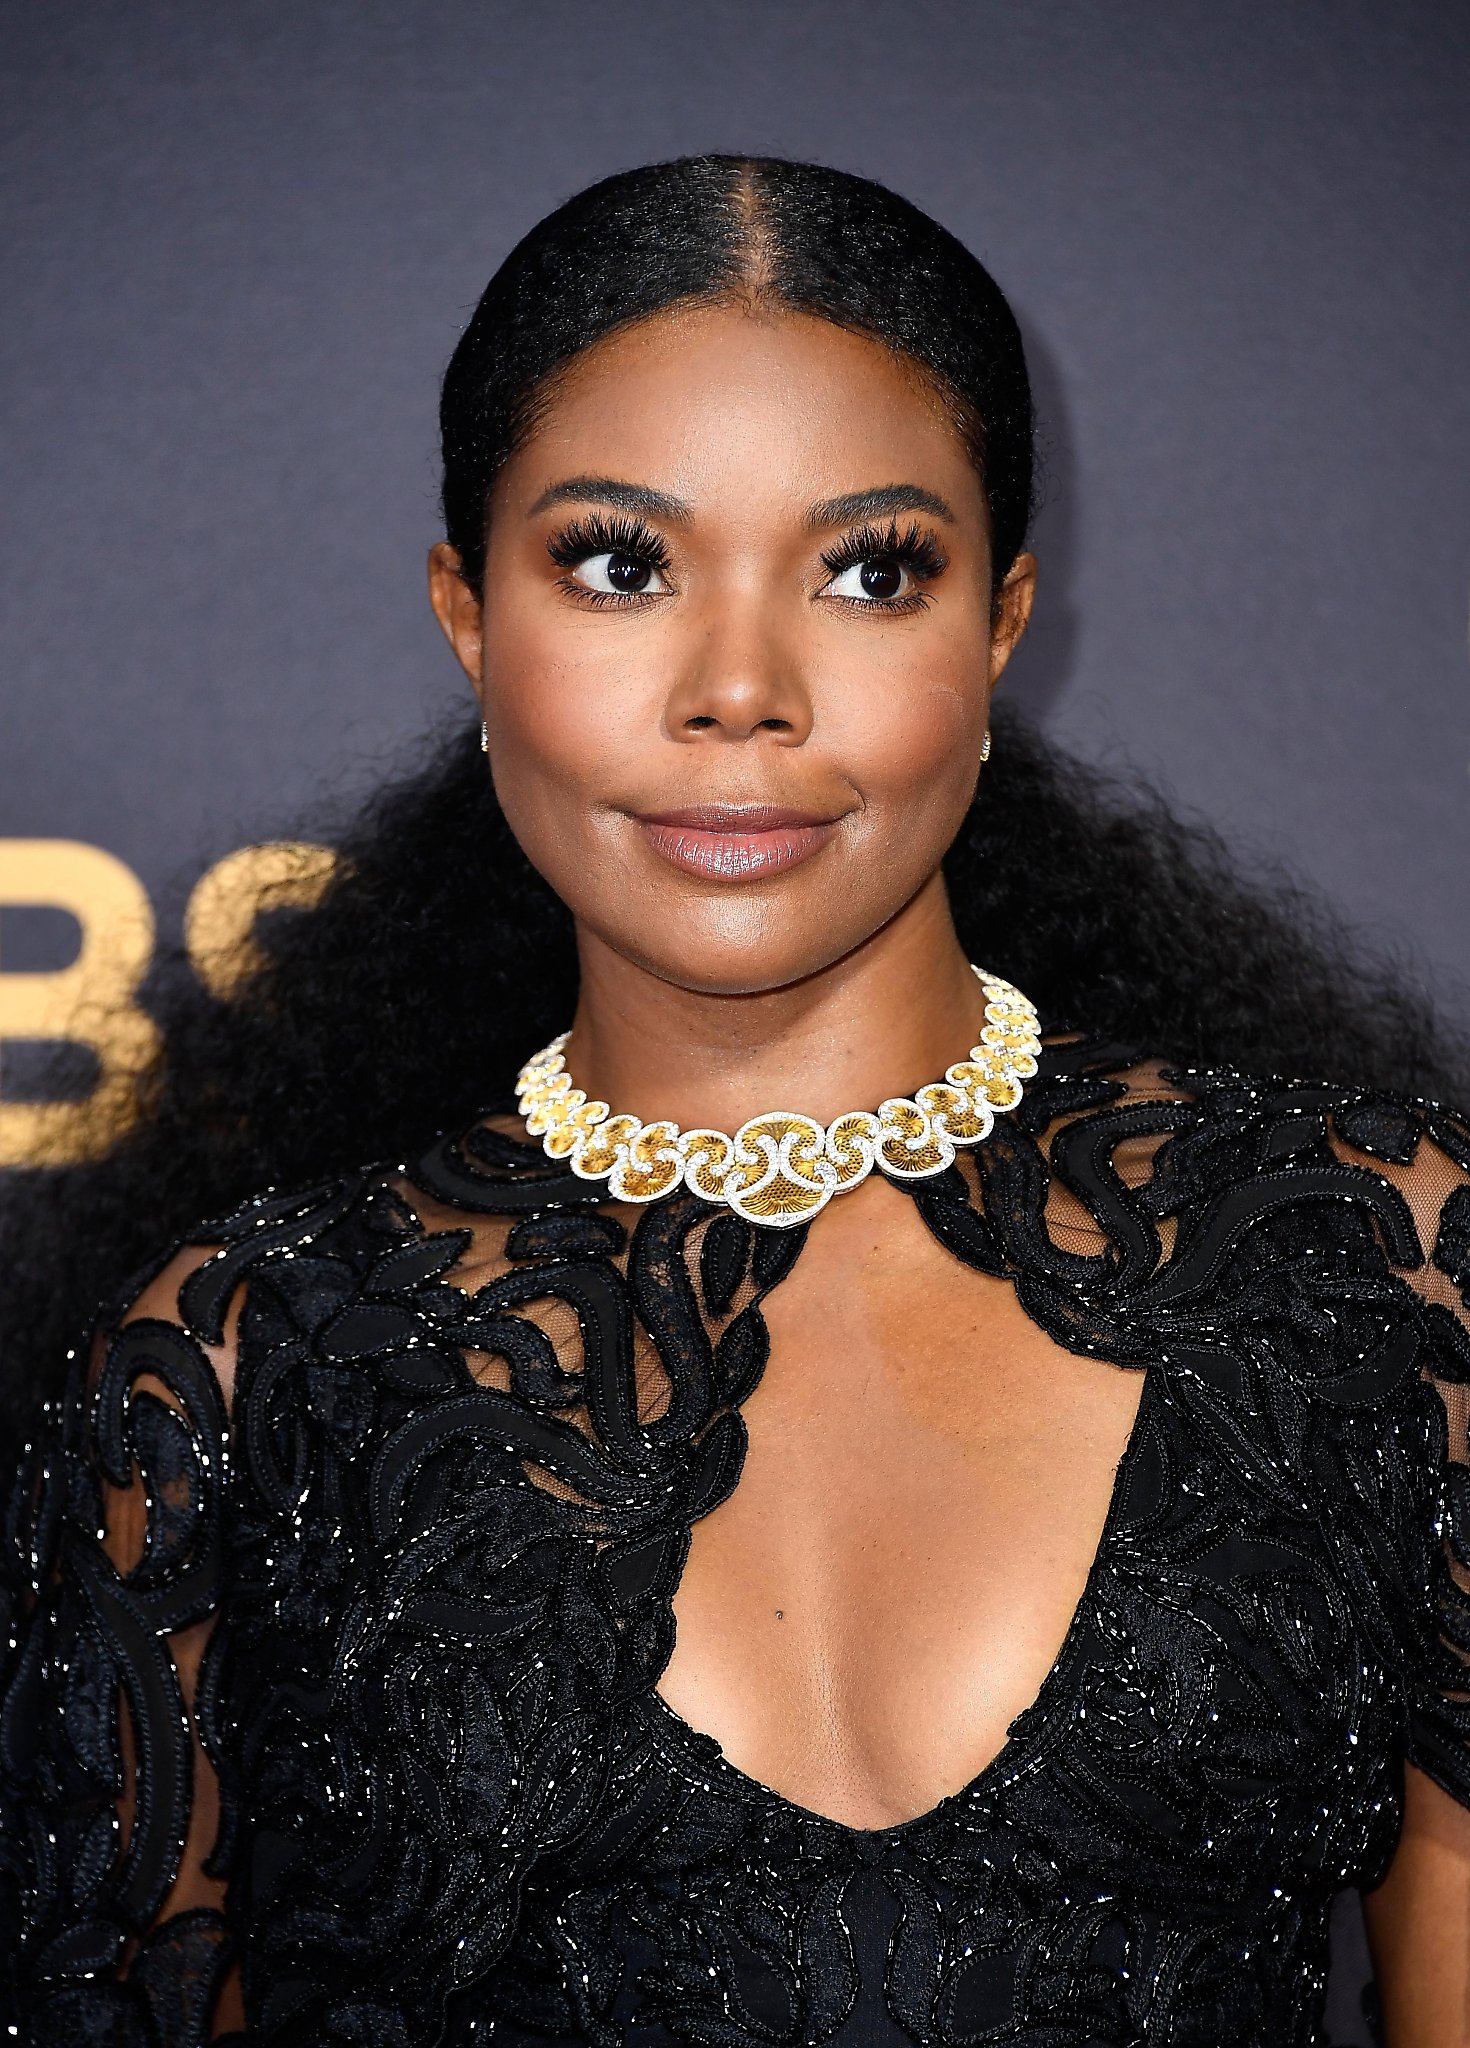 Gabrielle Union pours heart into wrenching, humorous debut book